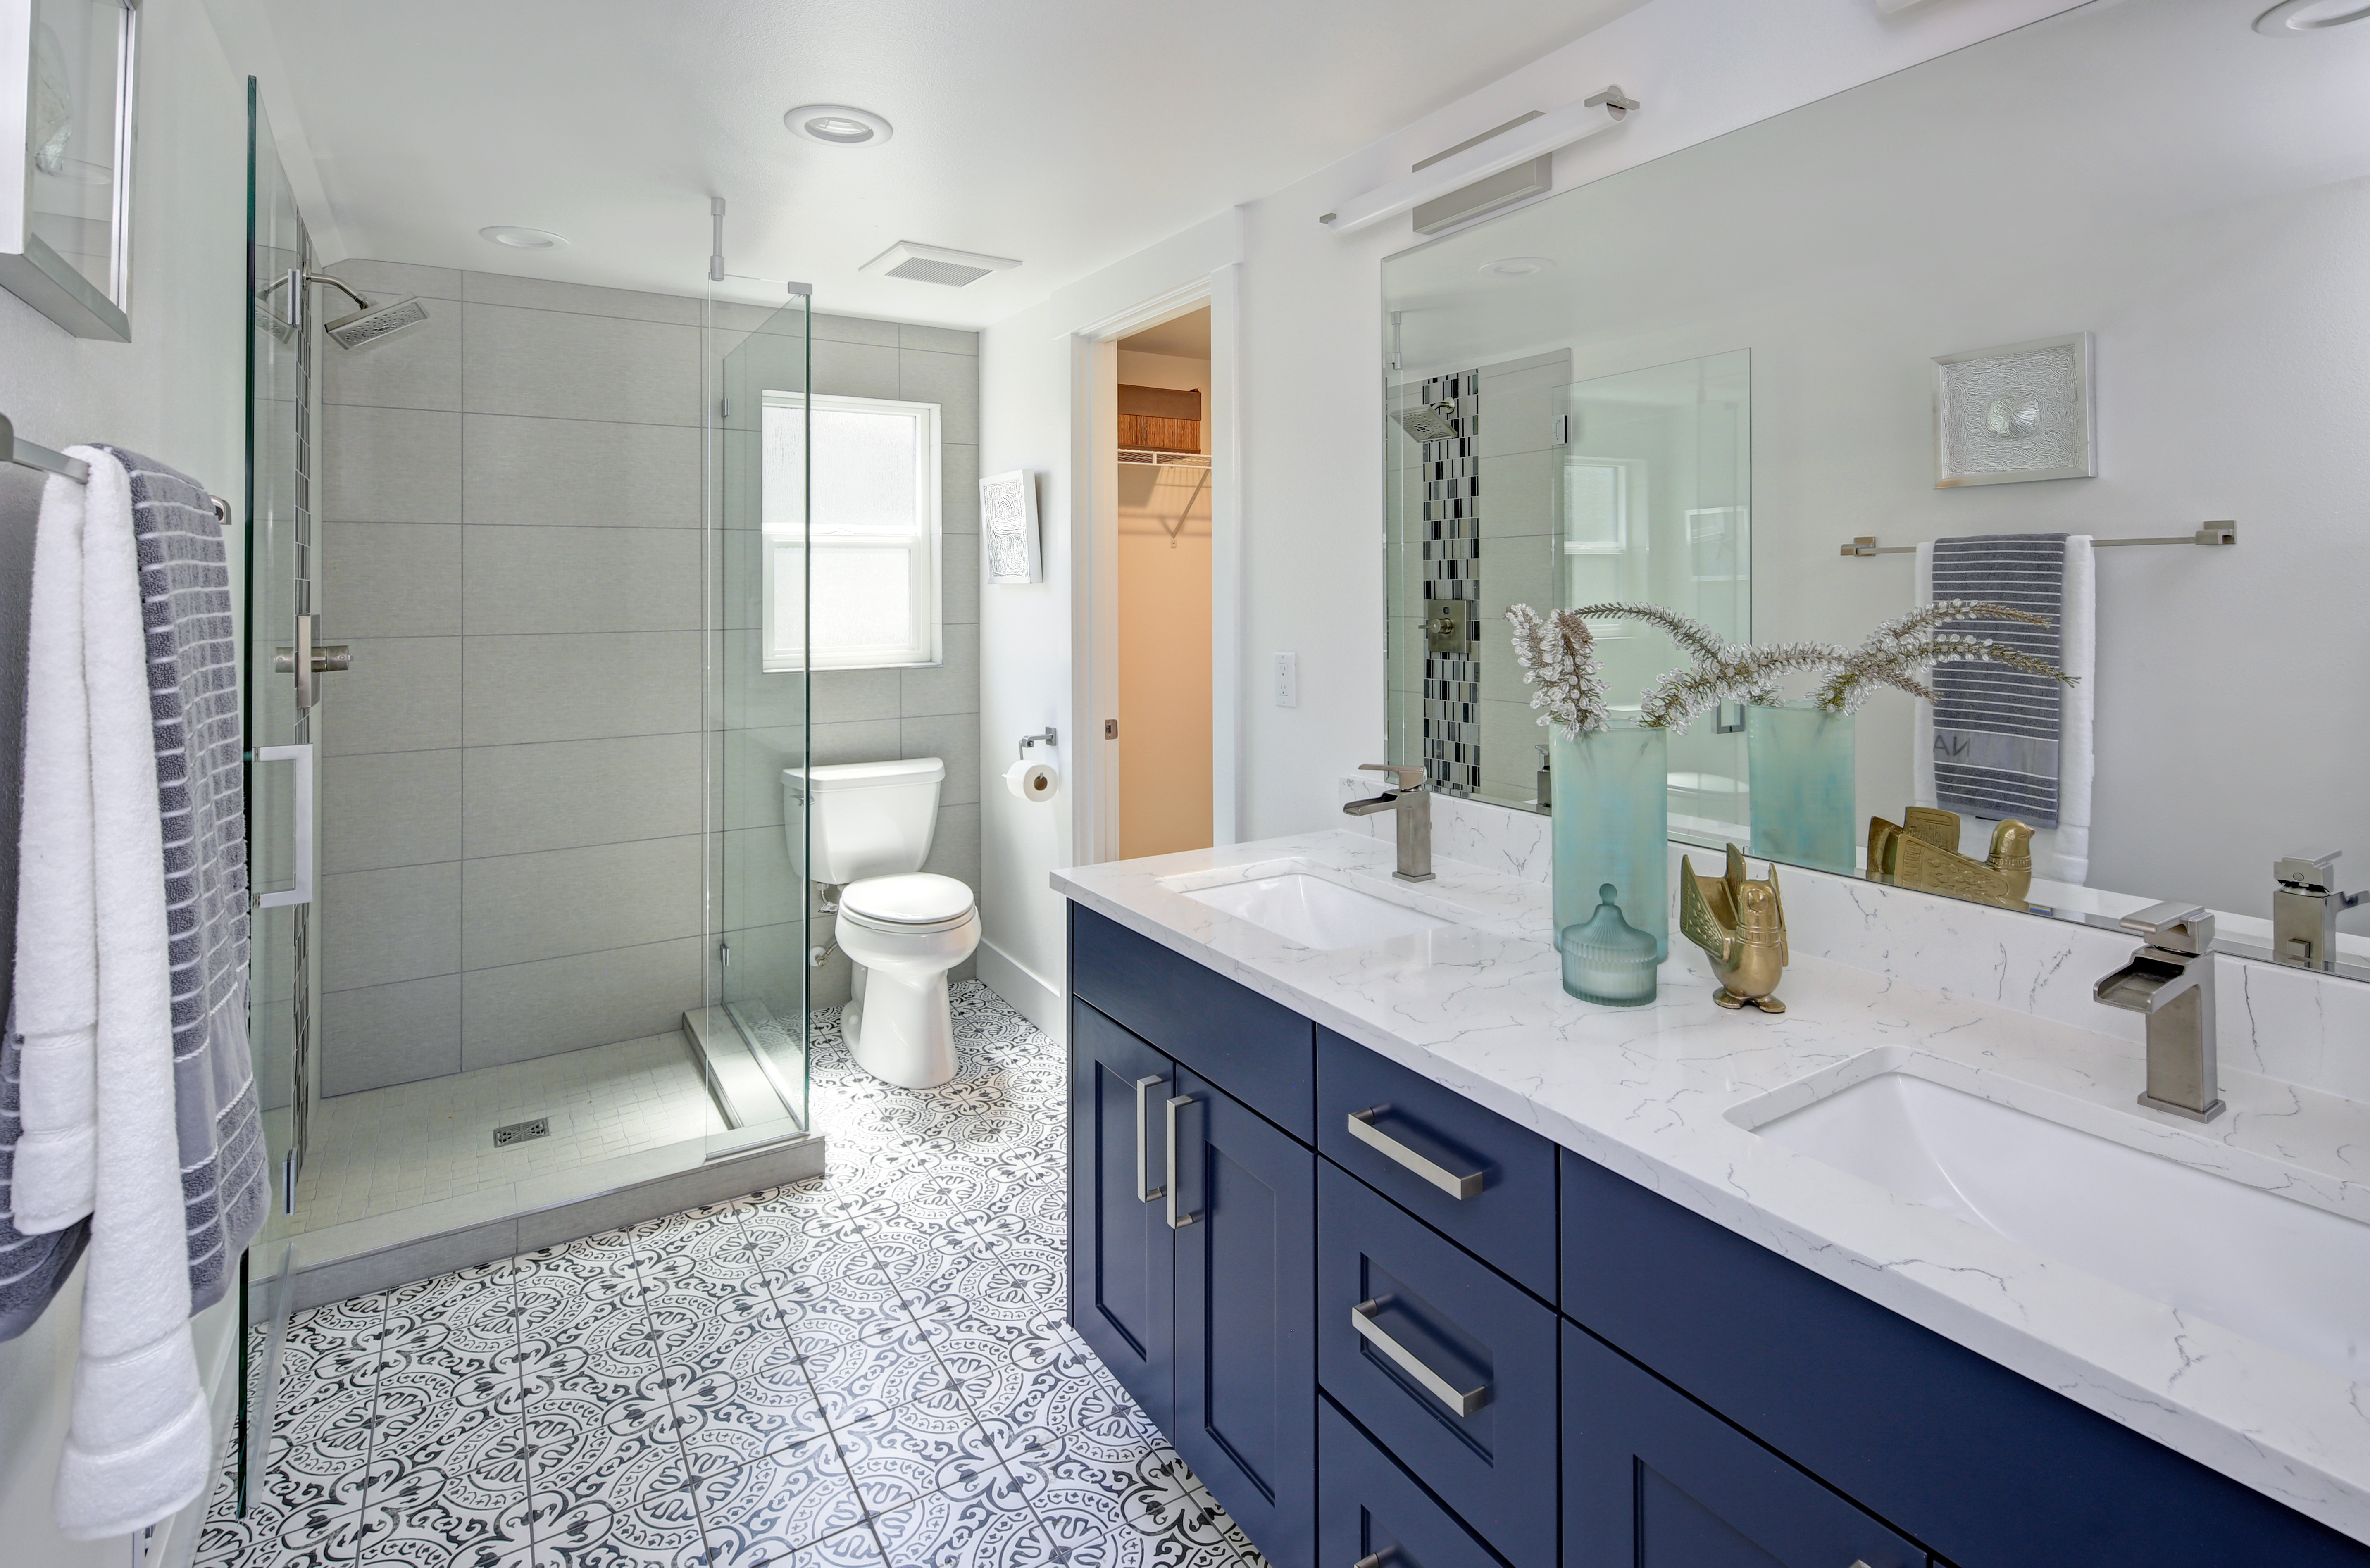 Modern bathroom interior with blue double vanity and glass shower | Carpet Barn